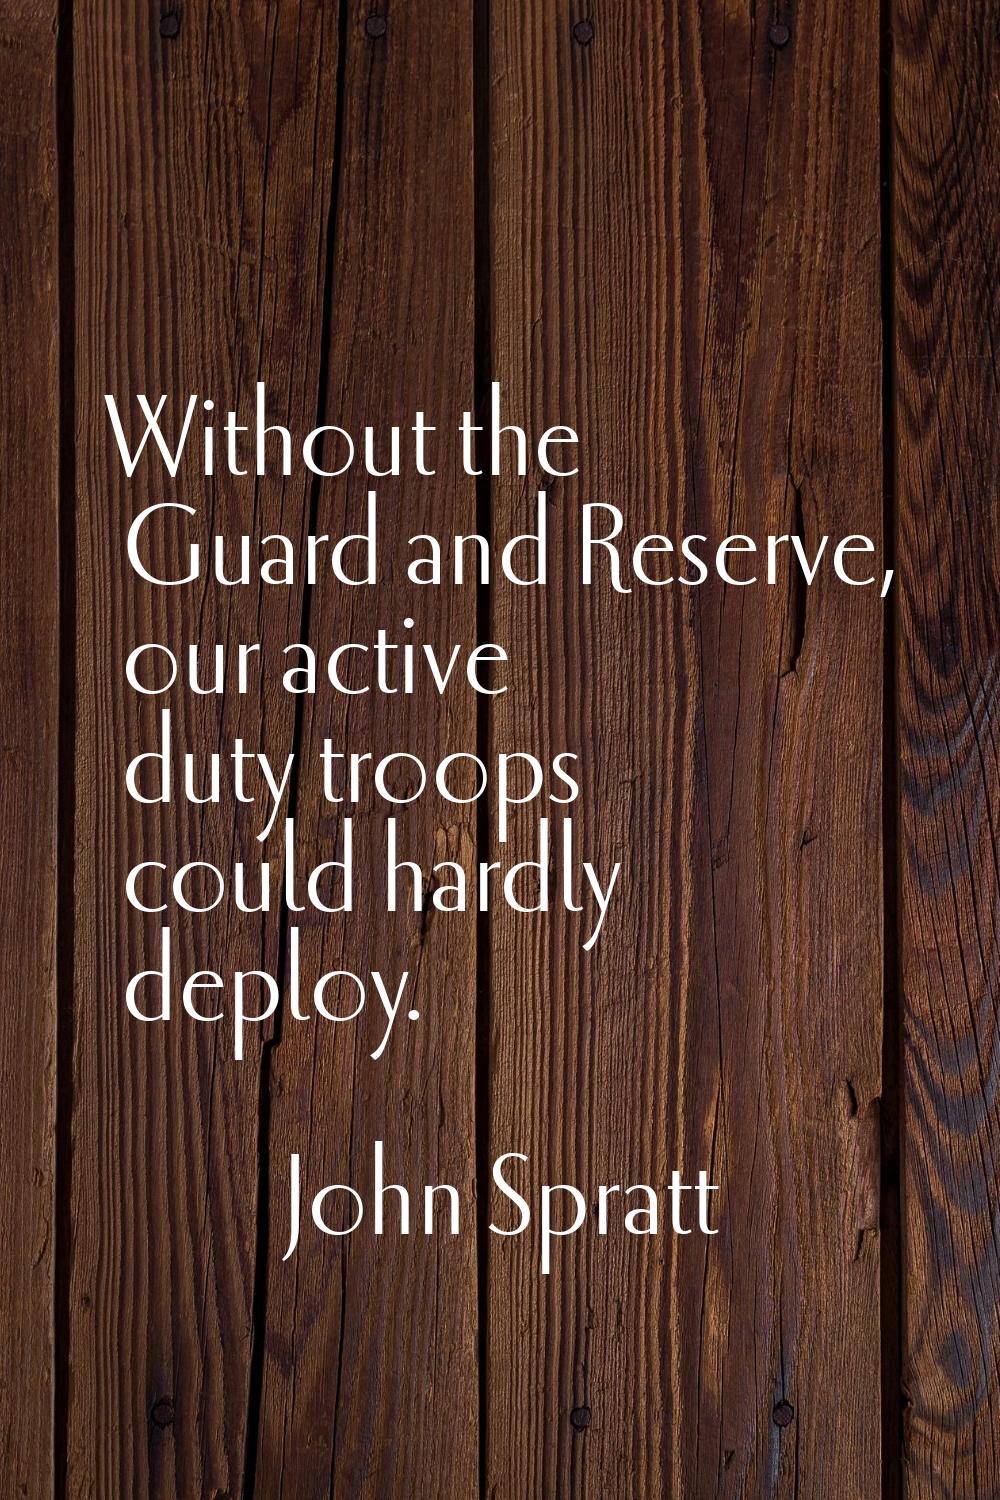 Without the Guard and Reserve, our active duty troops could hardly deploy.